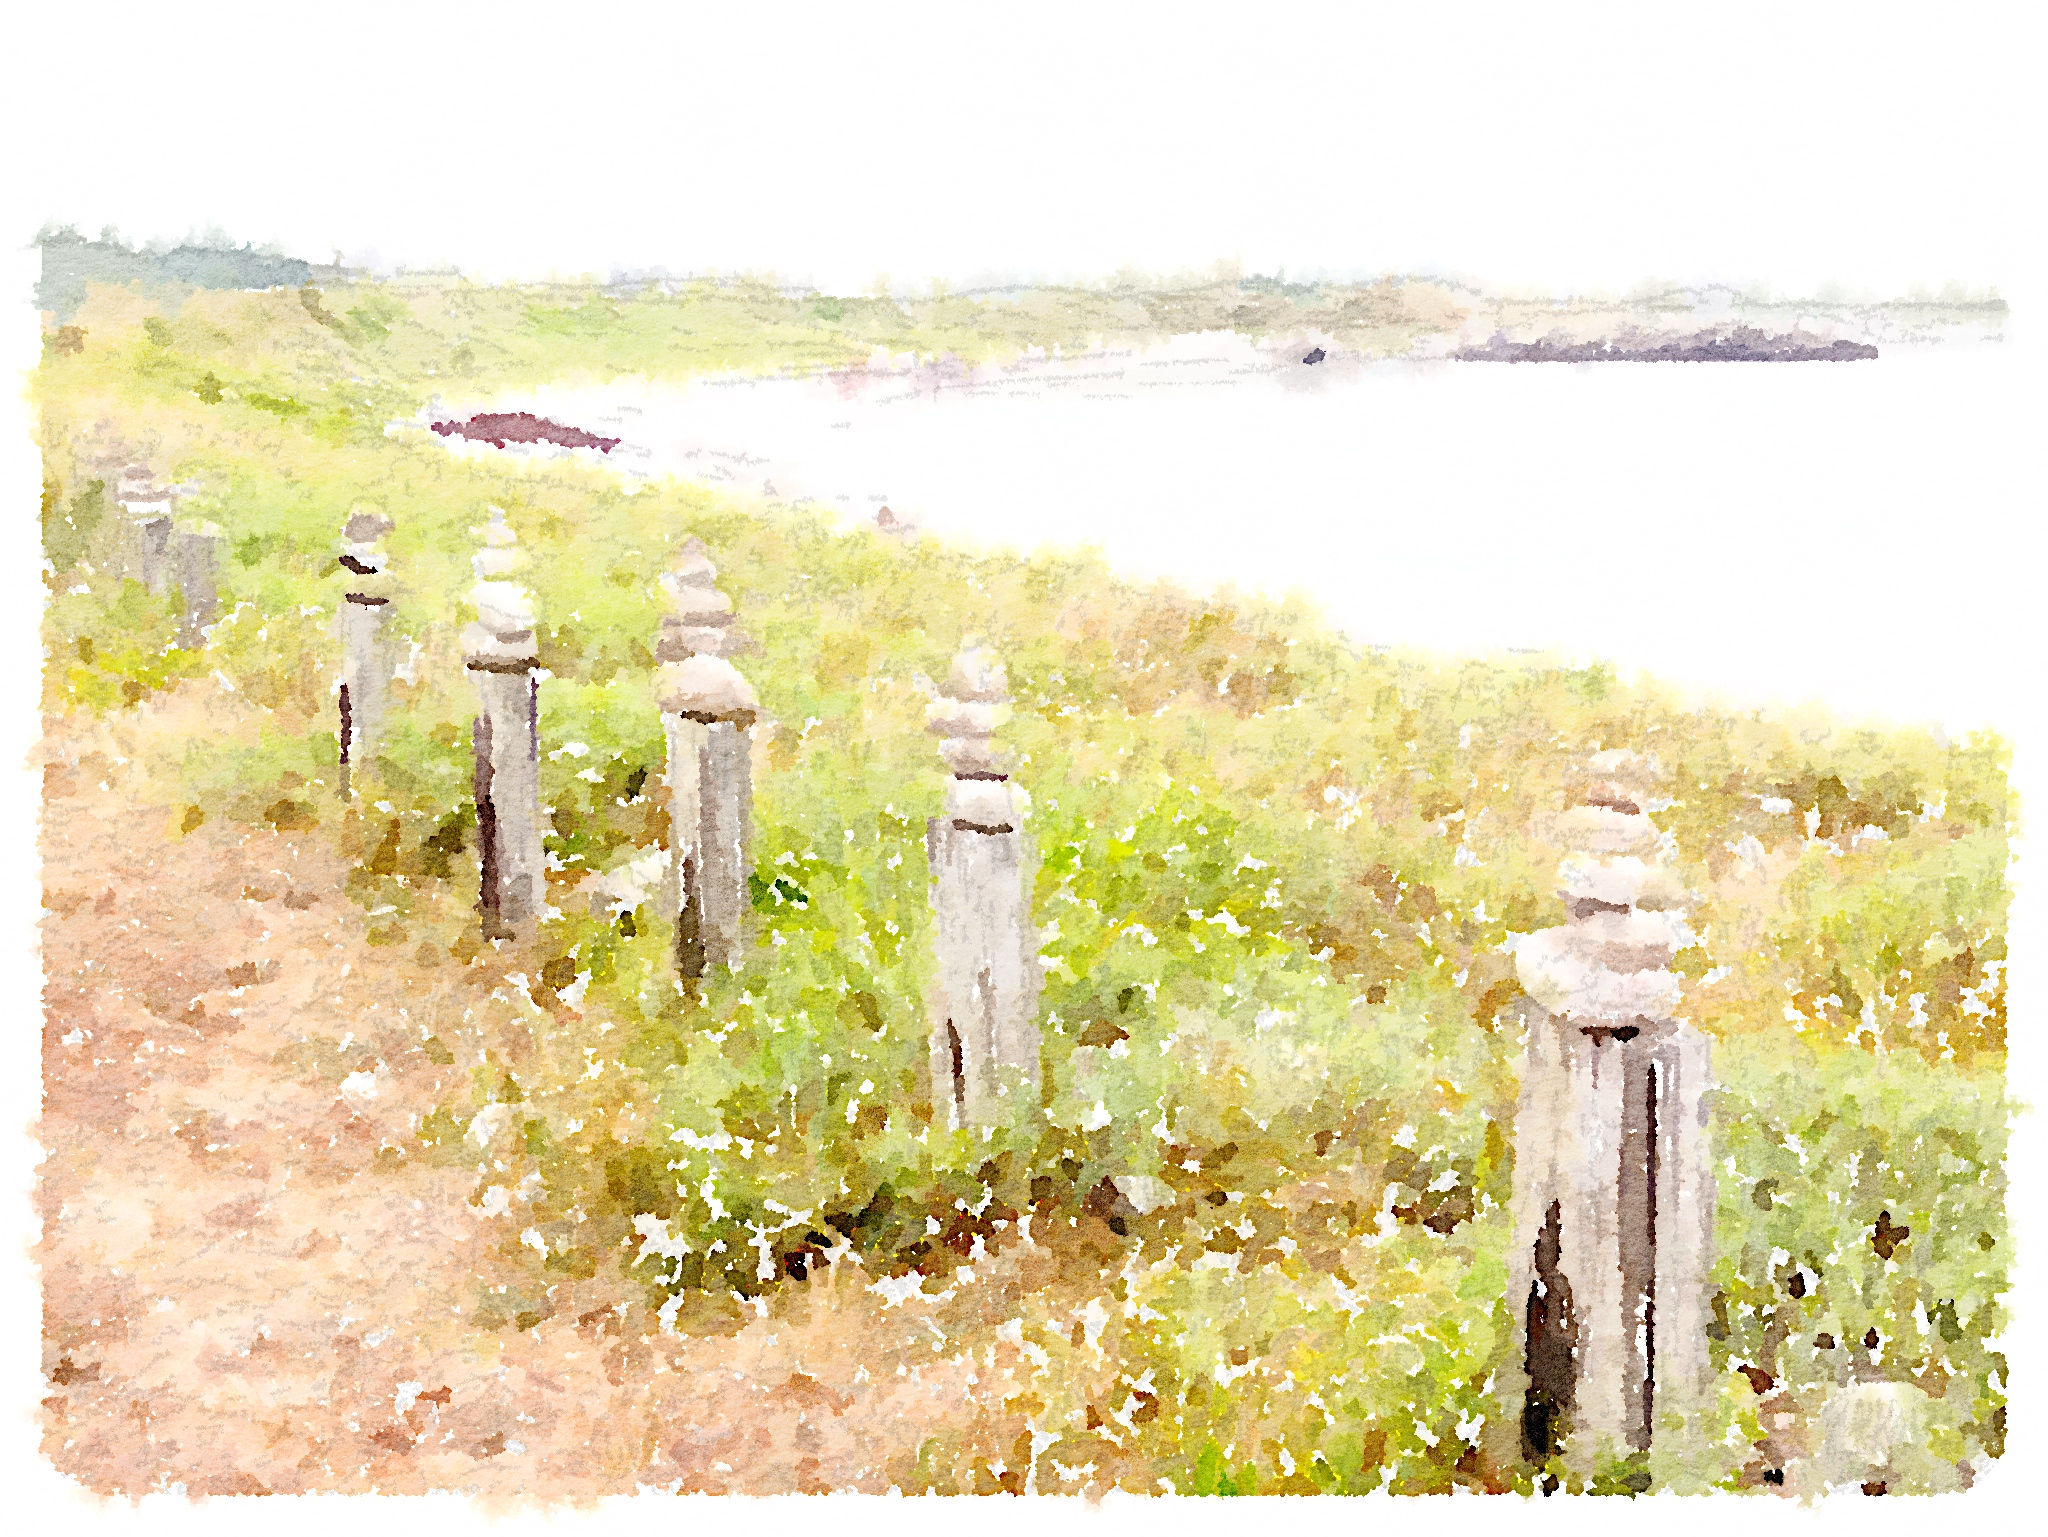 Small stones piled on wooden poles - Bryher